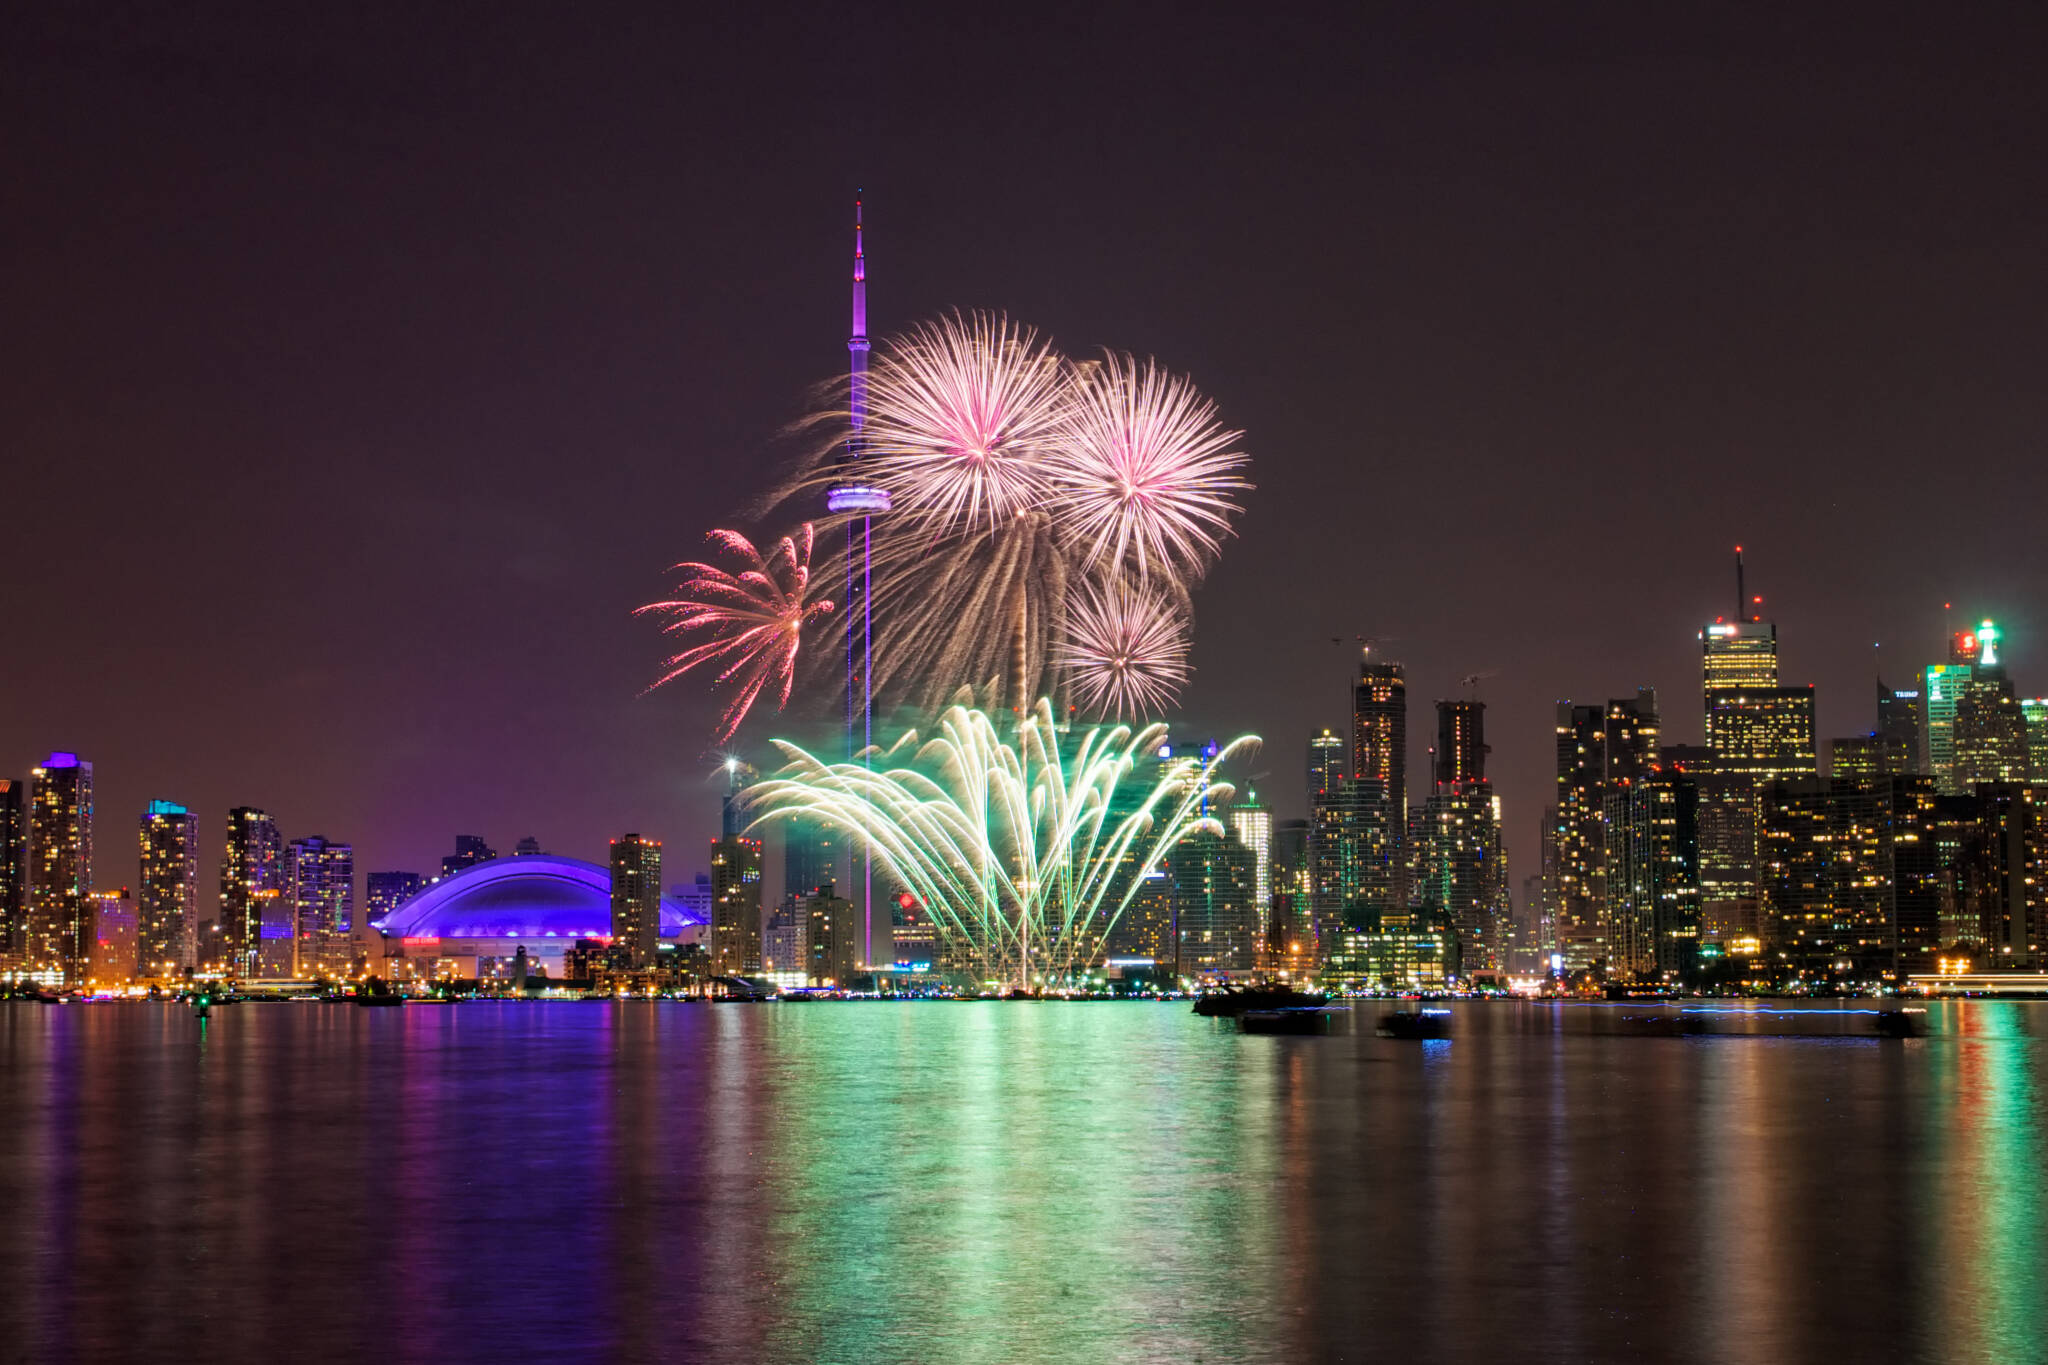 Canada Day events in Toronto for 2017